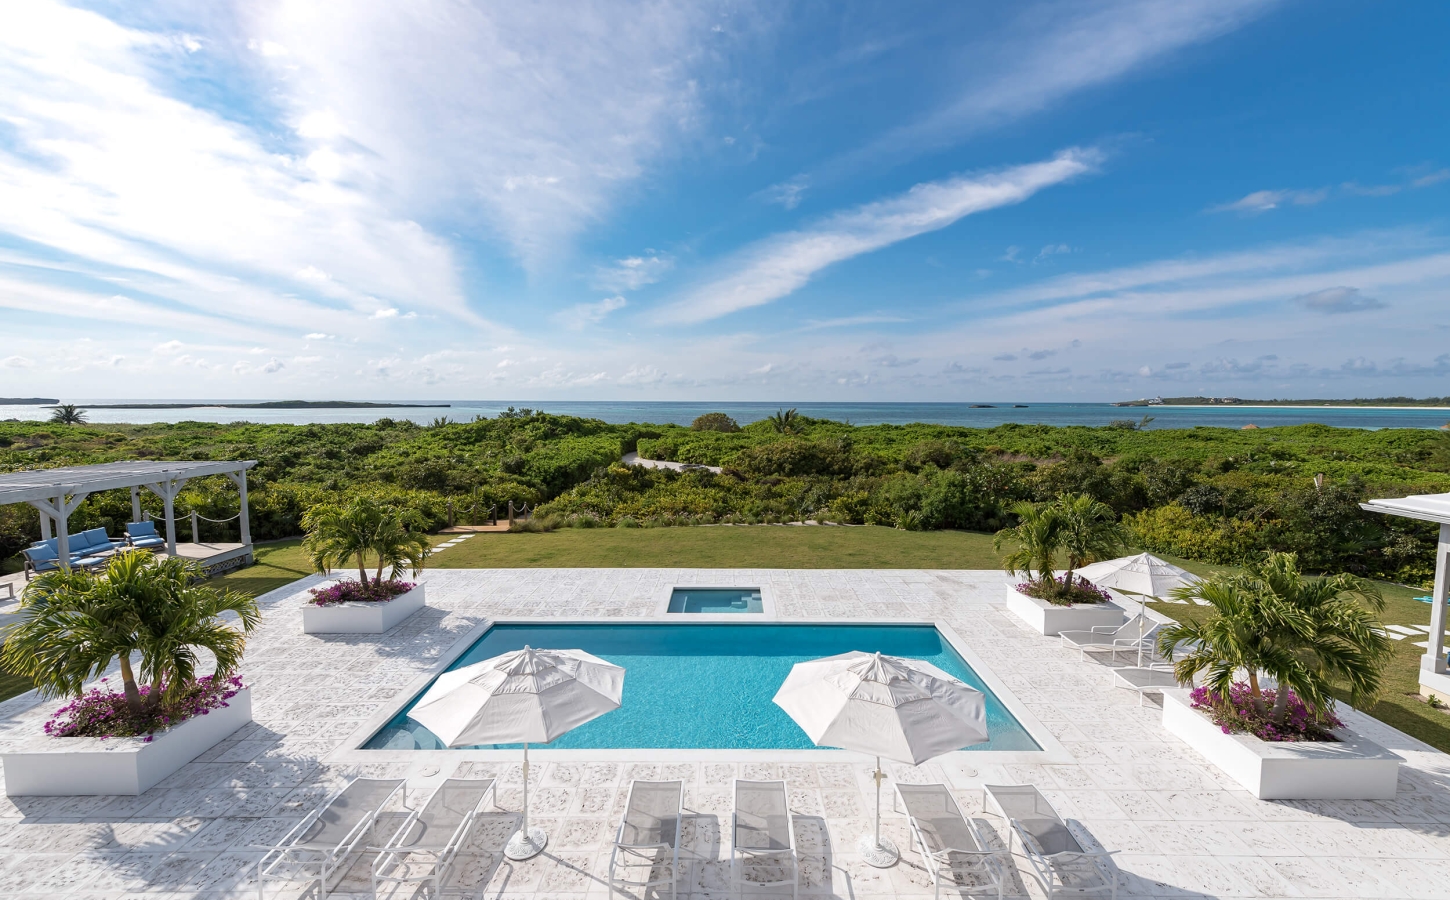 Infinity pool with ocean views from The Abaco Club in The Bahamas